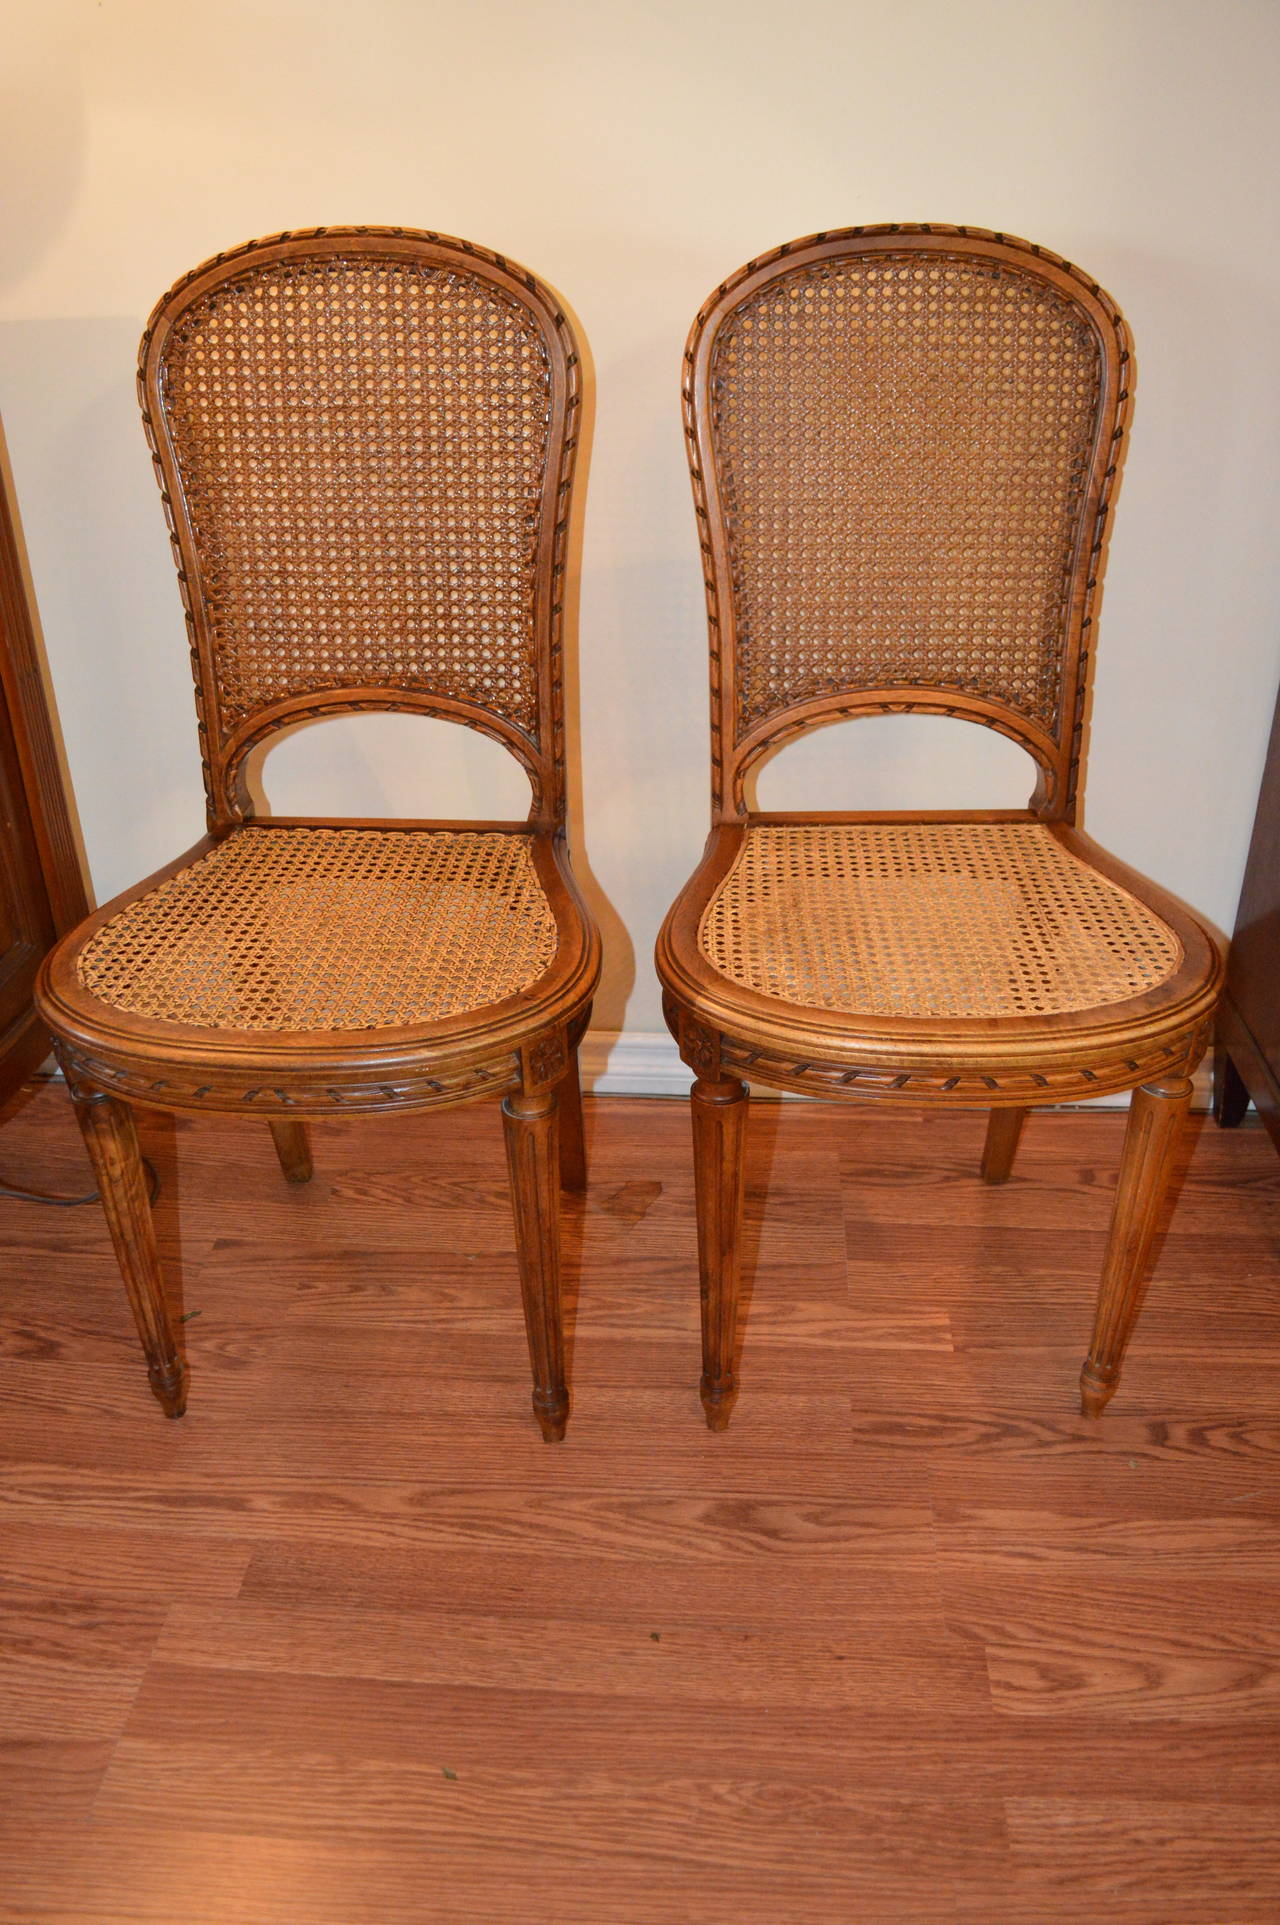 Set of 8 Louis XVI style caned back and seat oak dining chairs.
They have the Louis XVI style rope carved details all around the back and seat of the chairs.